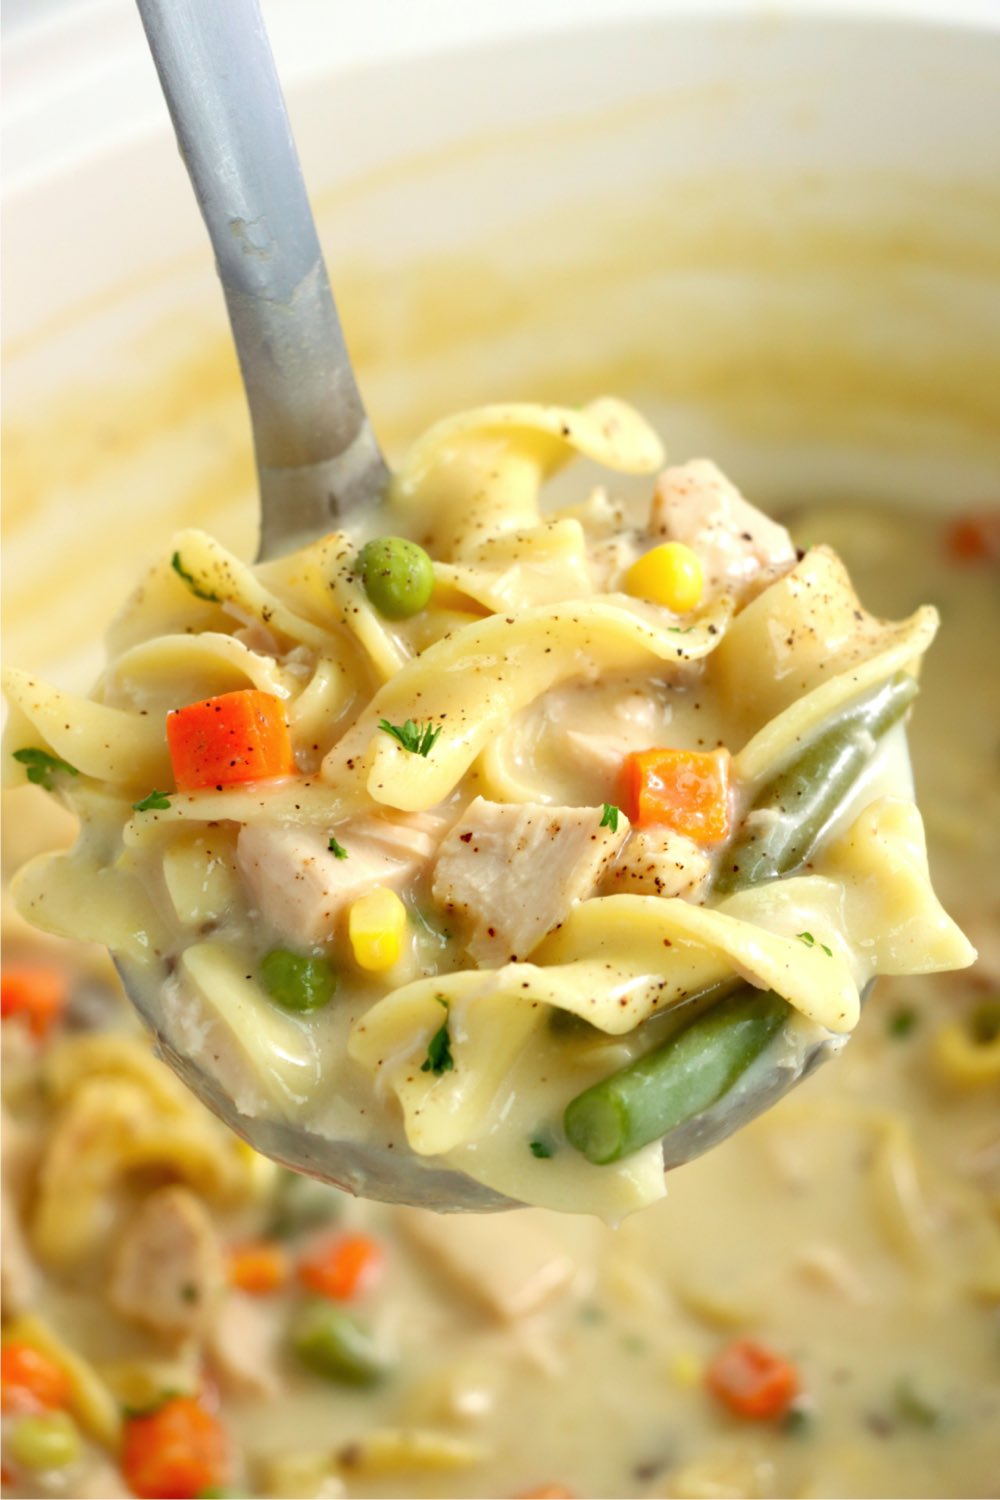 ladle filled with creamy chicken noodle soup